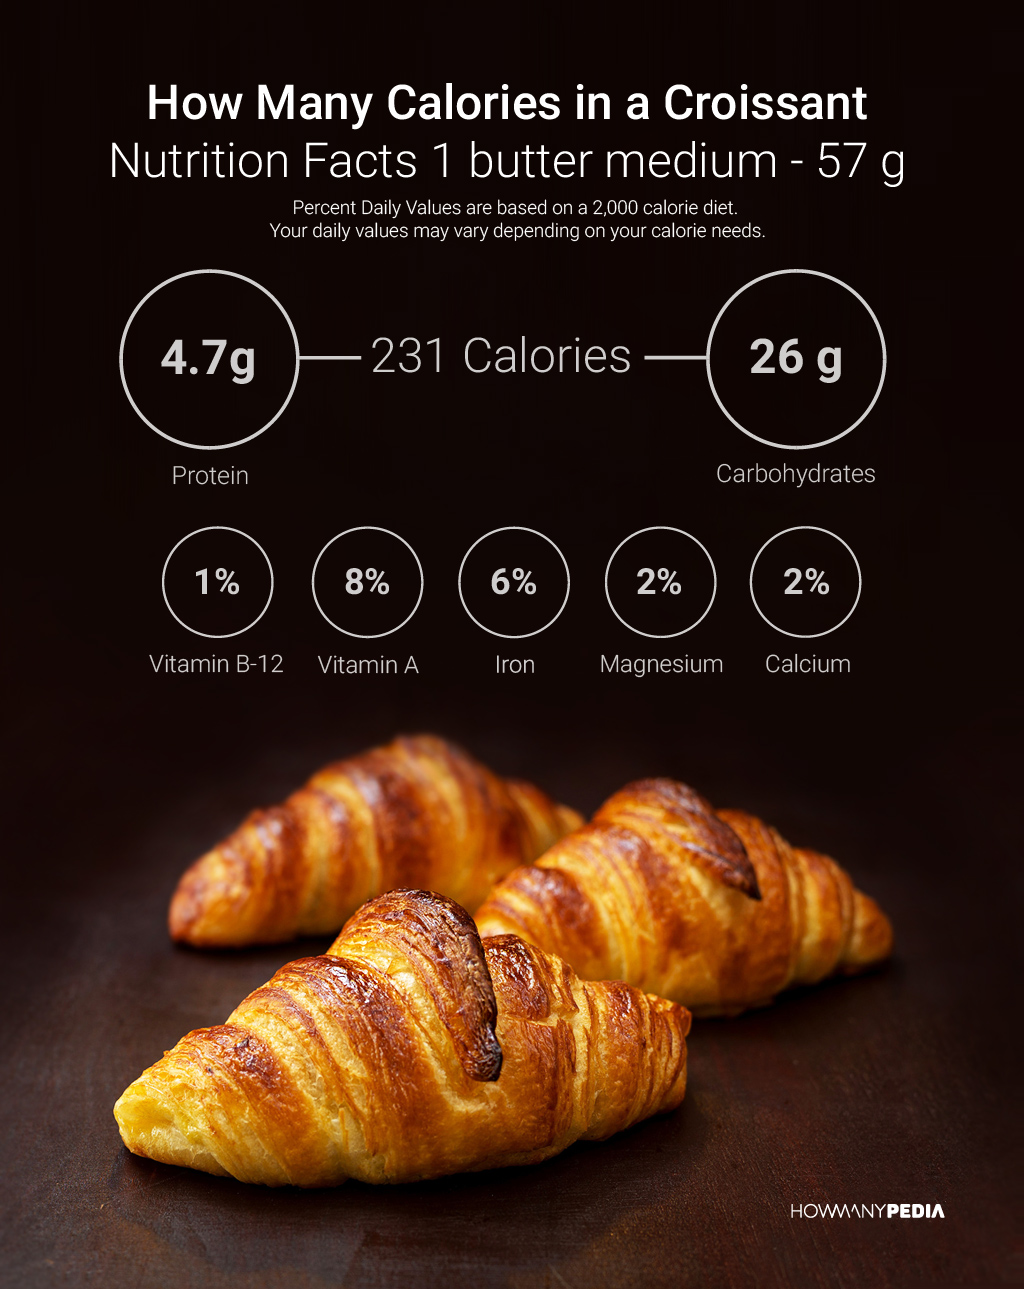 How Many Calories in a Croissant Nutrition Facts